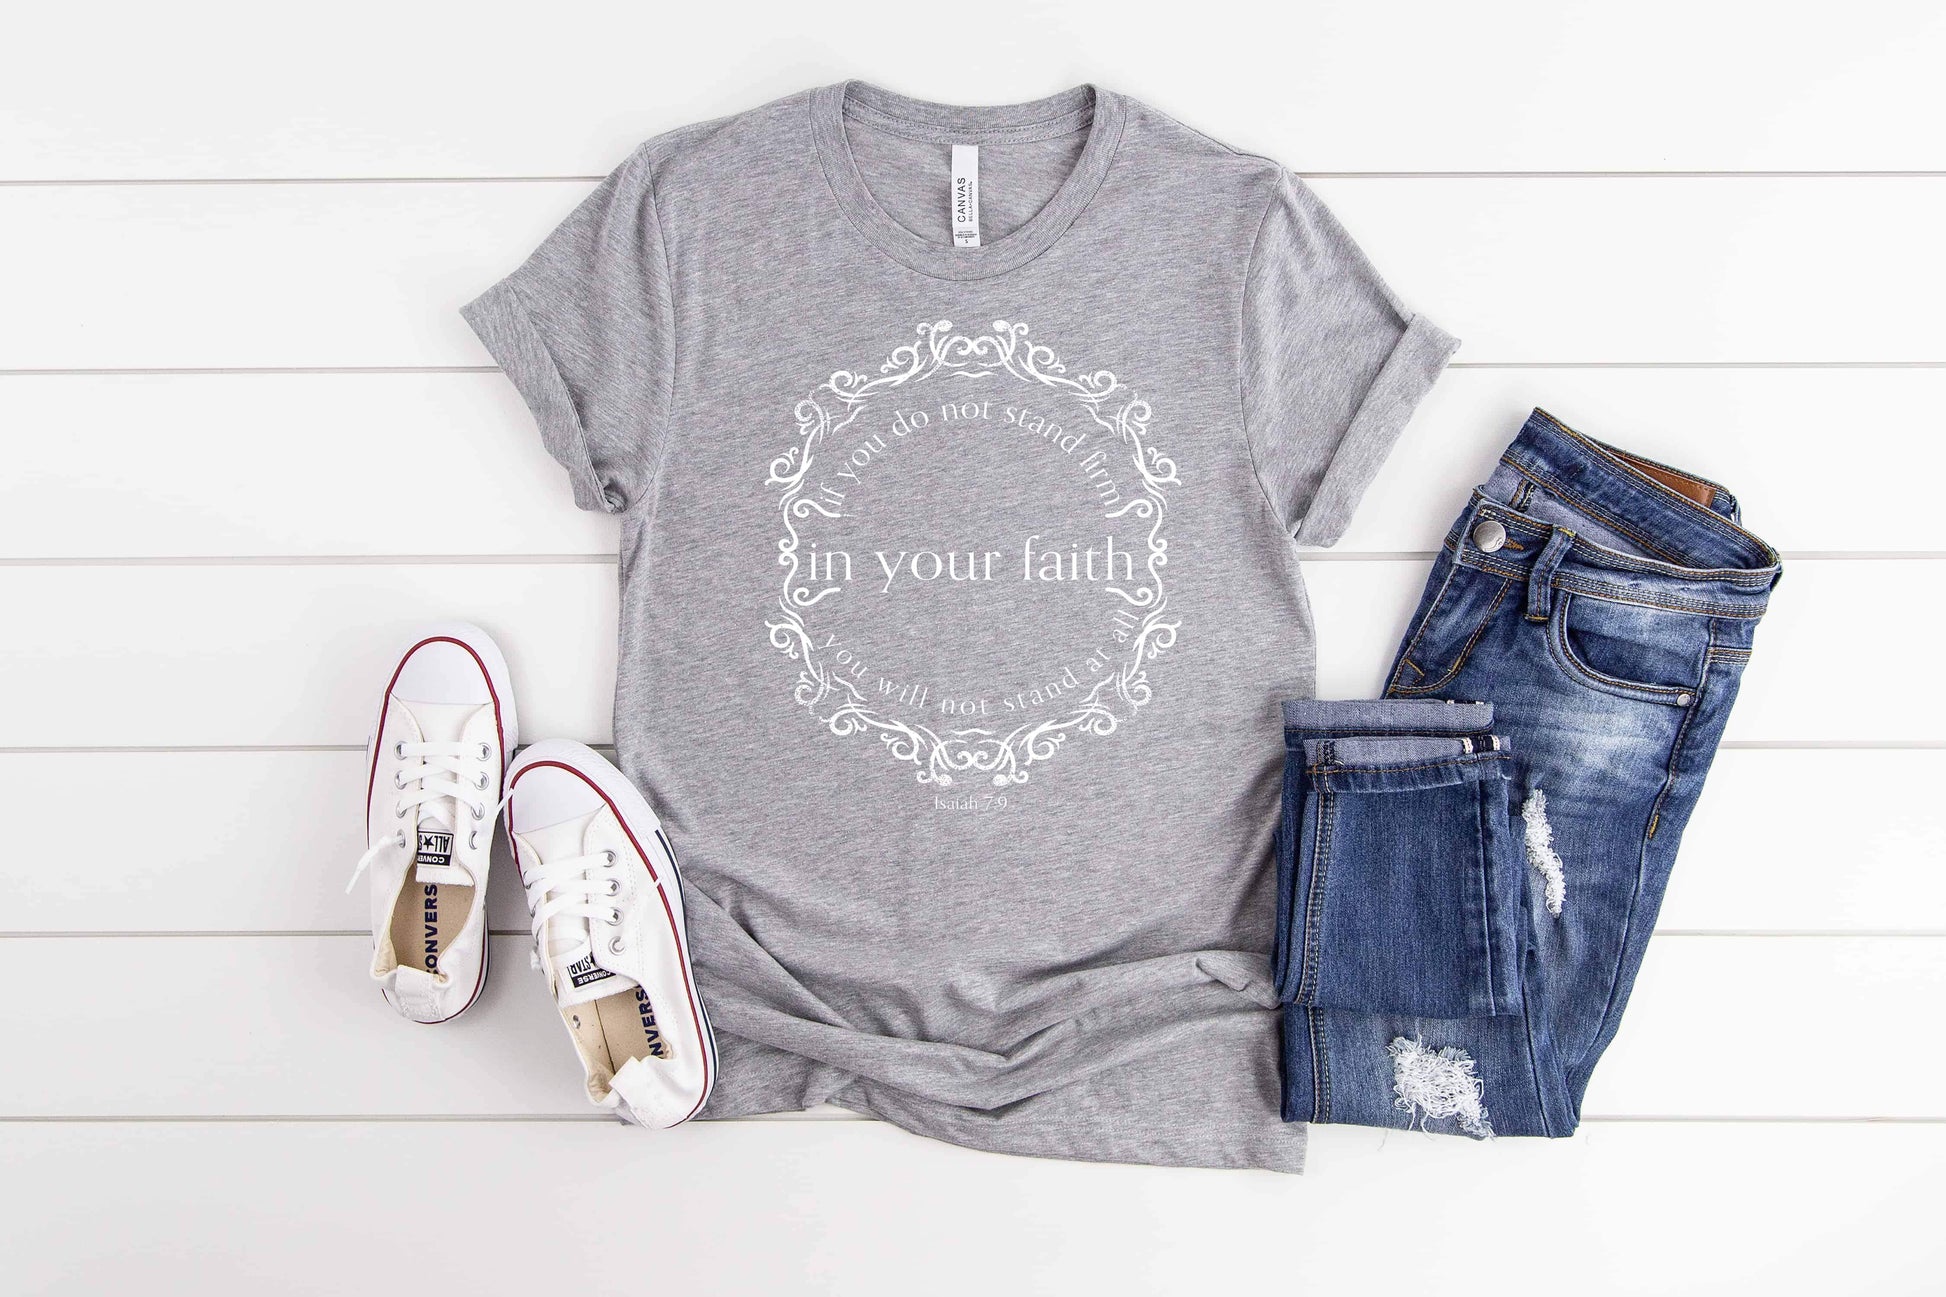 Isaiah 7:9 Ladies' Short Sleeve T-shirt athletic heather with jeans and white sneakers